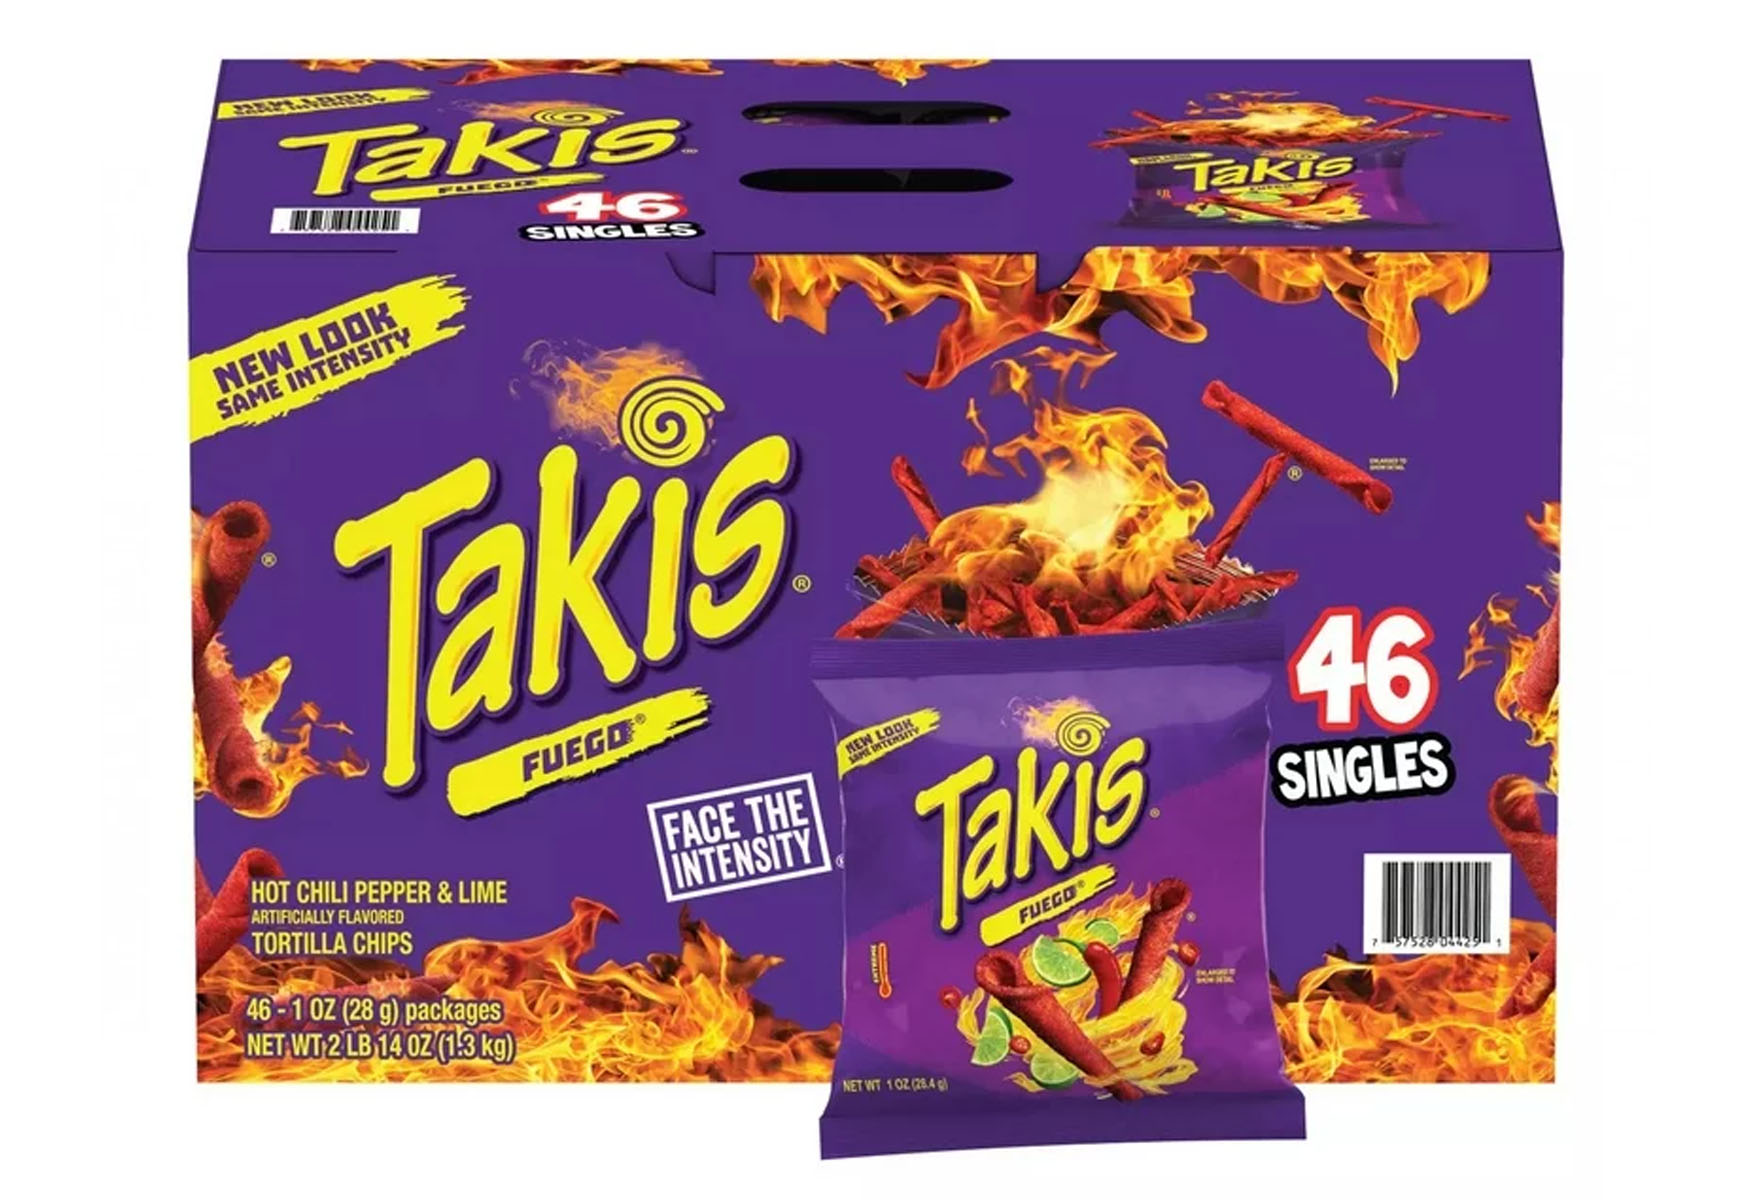 15-takis-fuego-nutrition-facts